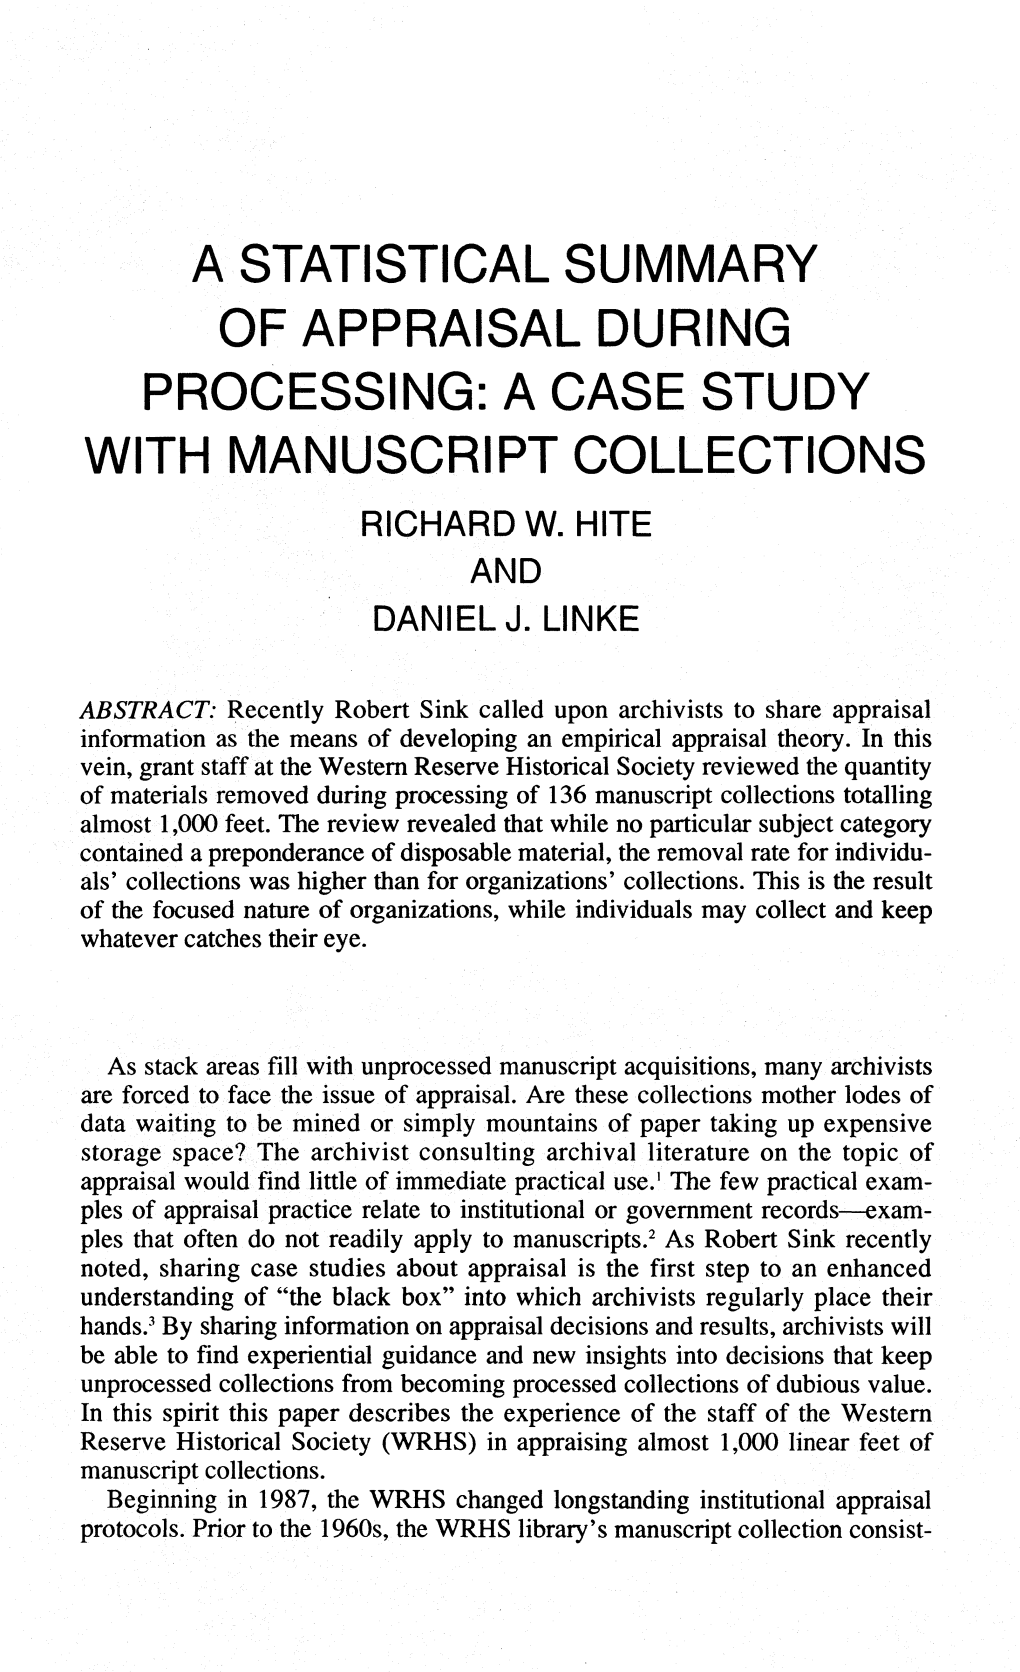 Processing: a Case Study with Manuscript Collections Richard W